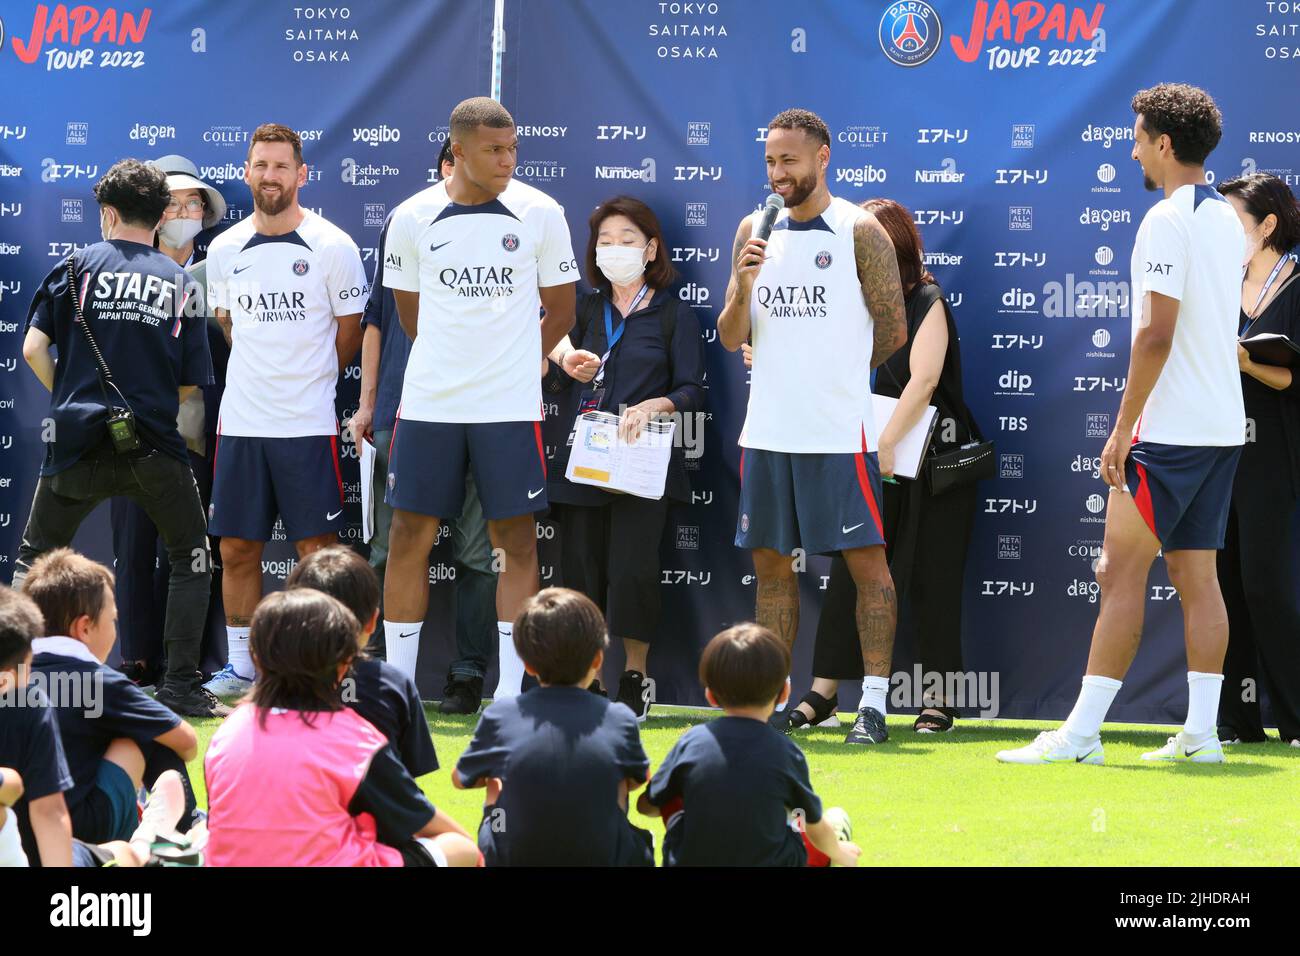 Tokyo, Japan. 18th July, 2022. (L-R) French football club team Paris Saint-Germain star players Lionel Messi, Kylian Mbappe, Neymar Jr and Marquinhos answer questions after they give a football clinic for children at the Prince Chichibu Rugby Field in Tokyo on Monday, July 18, 2022. Paris Saint-Germain will have games with Japanese club teams Kawasaki Frontale, Urawa Reds and Gamba Osaka for their Japan tour. Credit: Yoshio Tsunoda/AFLO/Alamy Live News Stock Photo